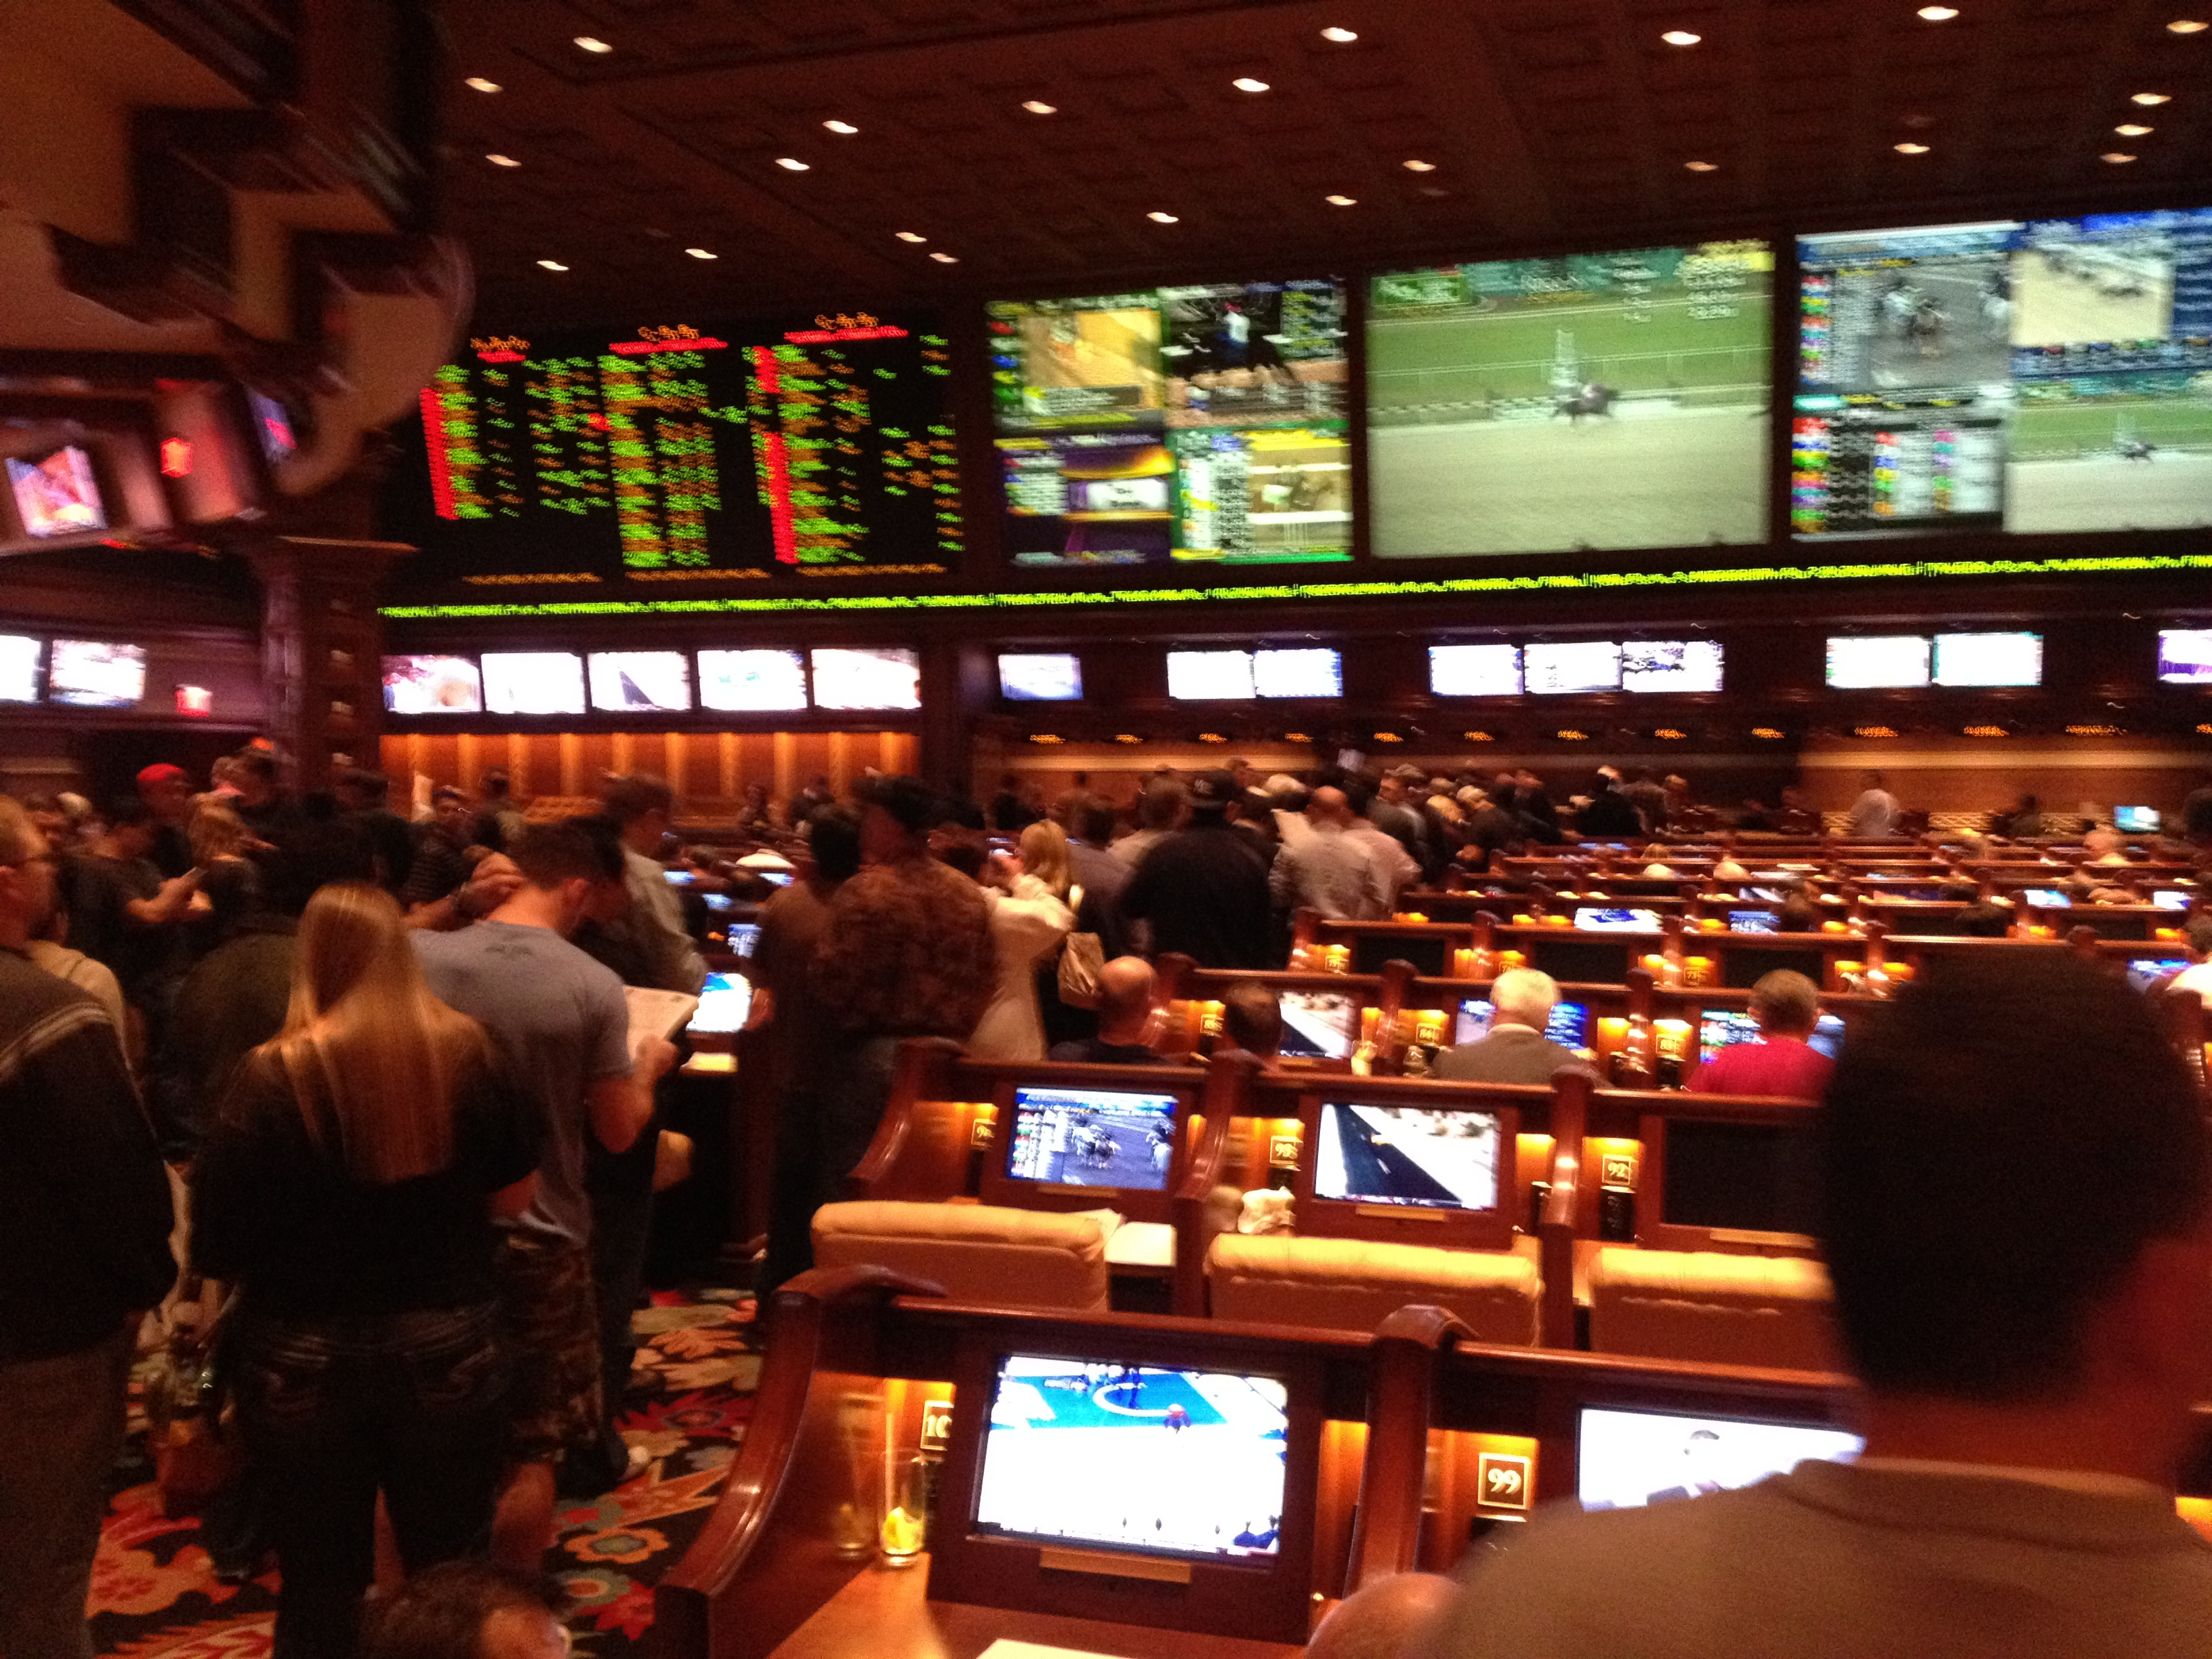 Las Vegas sports book in action